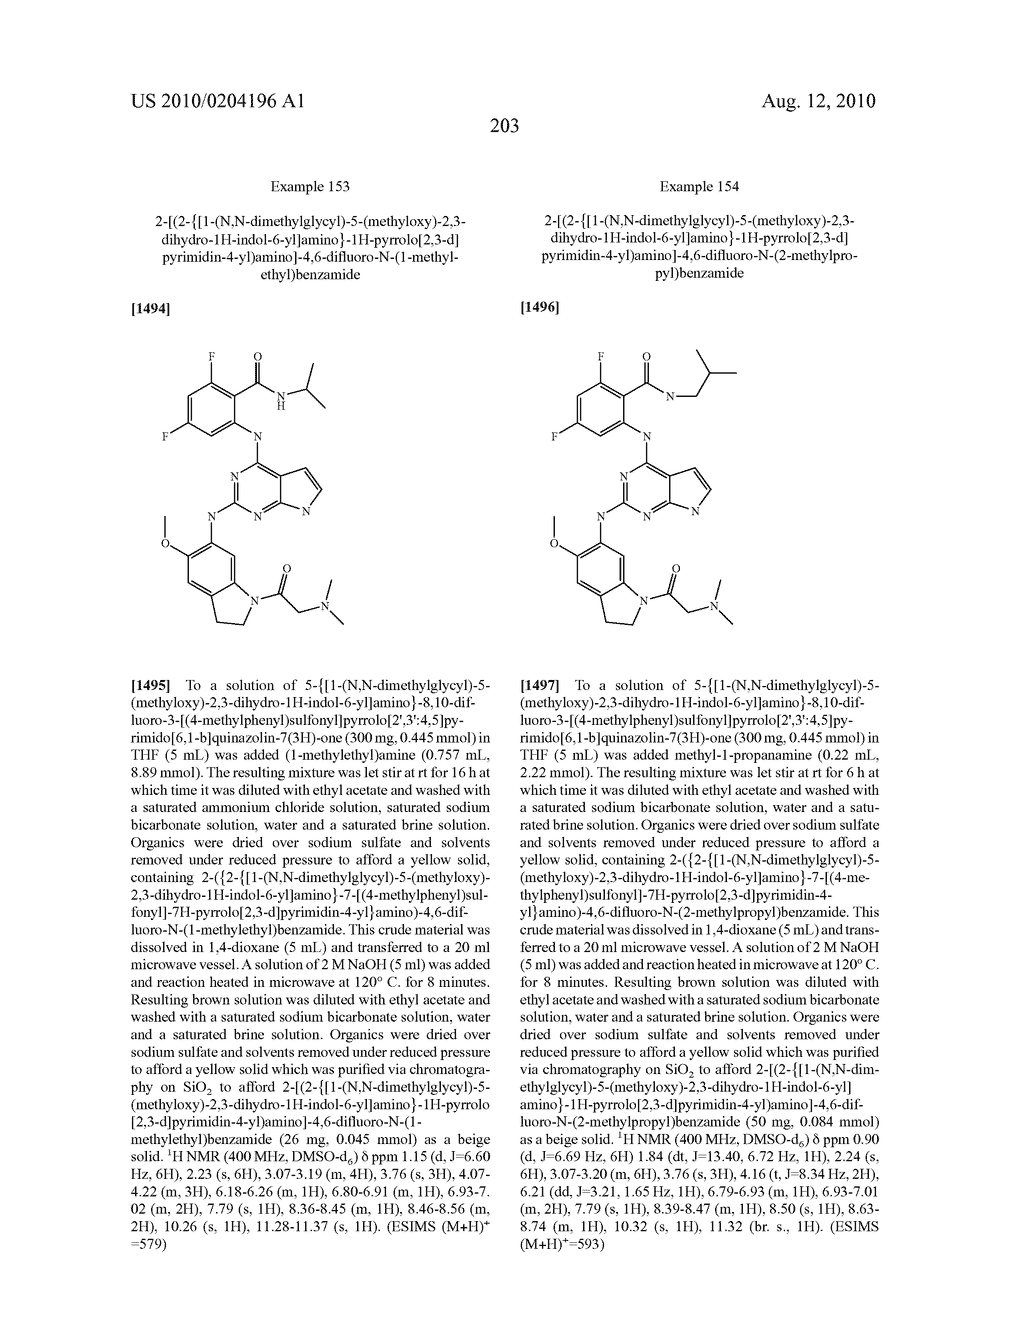 2-[2--1H-Pyrrolo[2,3-D]Pyrimidin-4-YL)Amino] Benzamide Derivatives As IGF-1R Inhibitors For The Treatment Of Cancer - diagram, schematic, and image 205